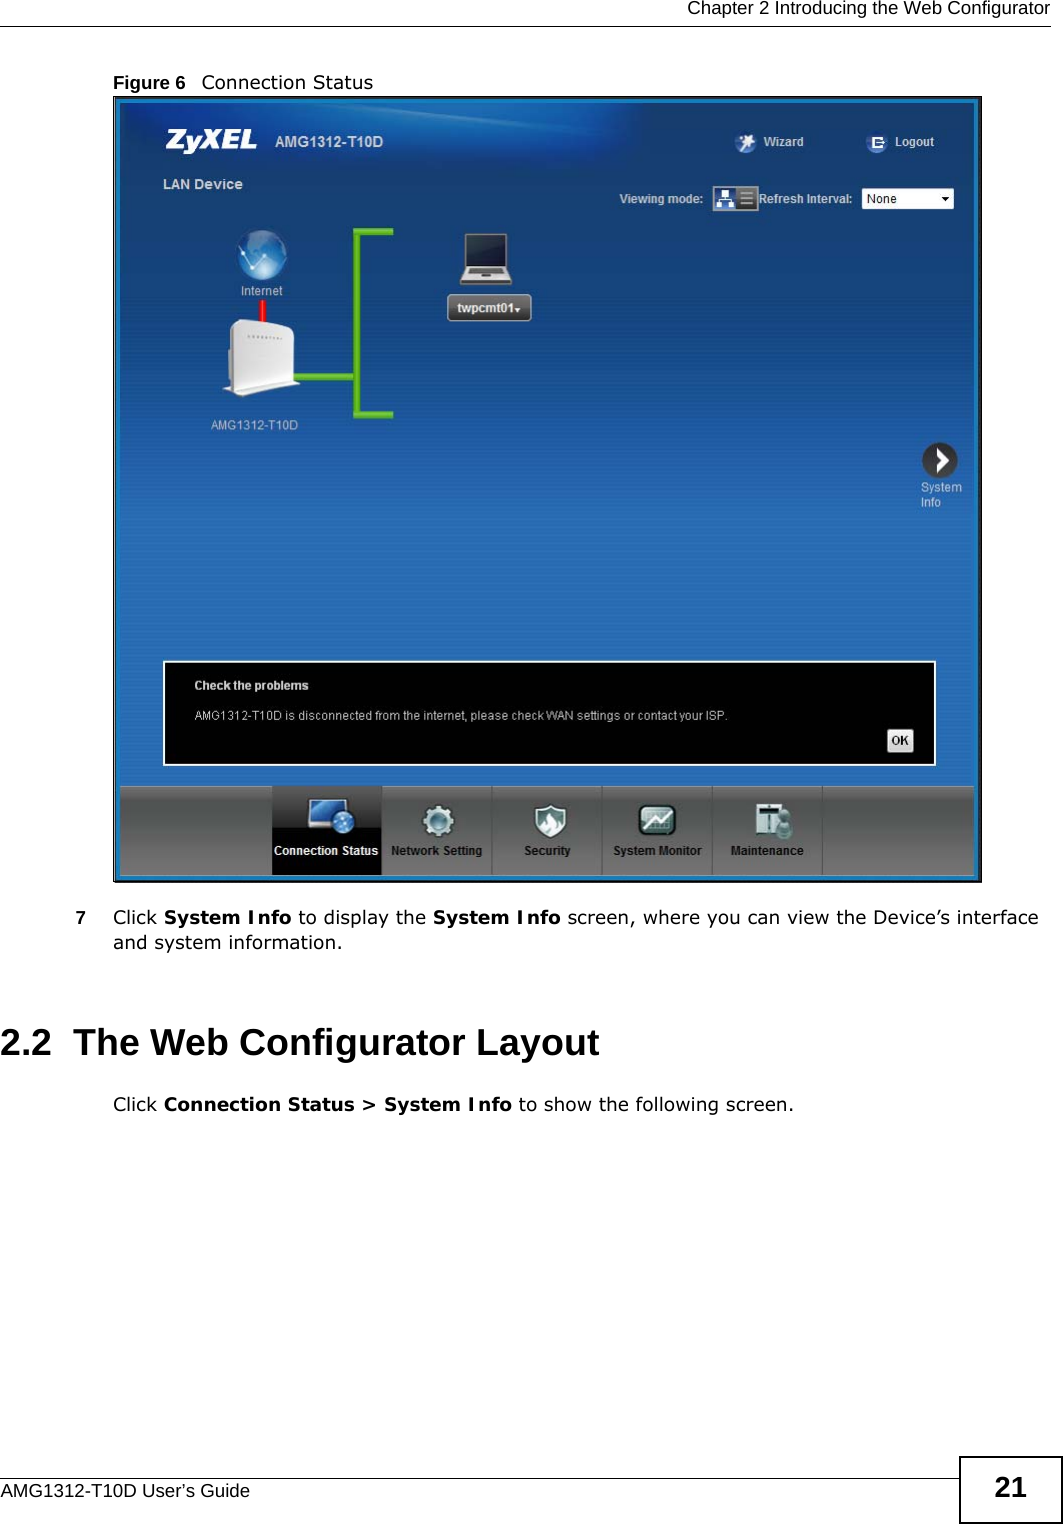  Chapter 2 Introducing the Web ConfiguratorAMG1312-T10D User’s Guide 21Figure 6   Connection Status 7Click System Info to display the System Info screen, where you can view the Device’s interface and system information. 2.2  The Web Configurator LayoutClick Connection Status &gt; System Info to show the following screen.